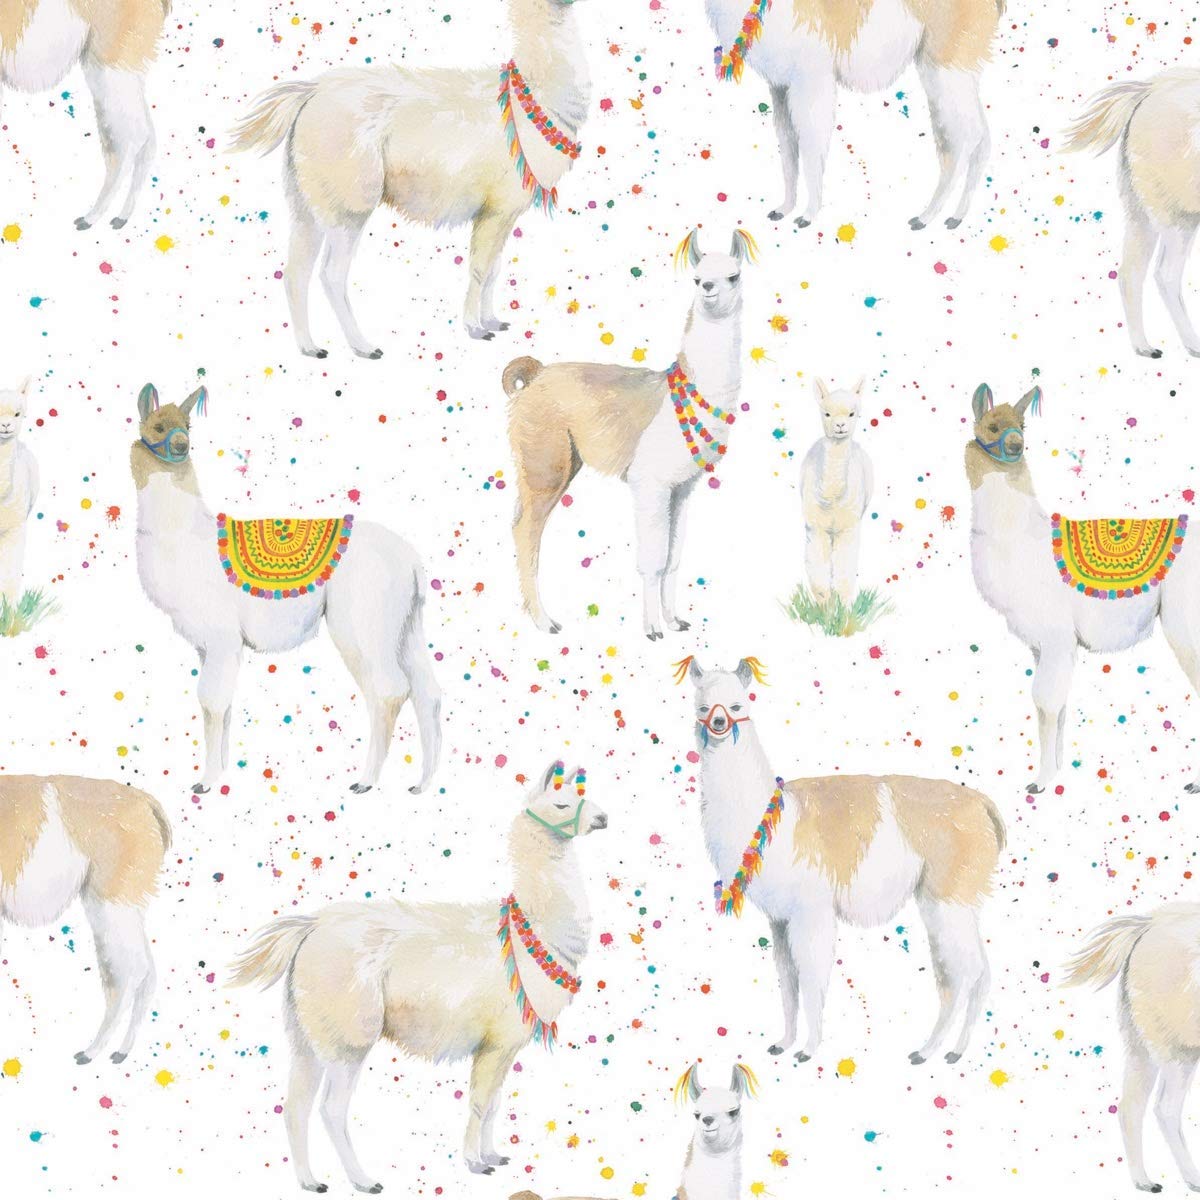 Llama birthday gift wrapping paper by Ceinwen Campbell at The Arty penguin 